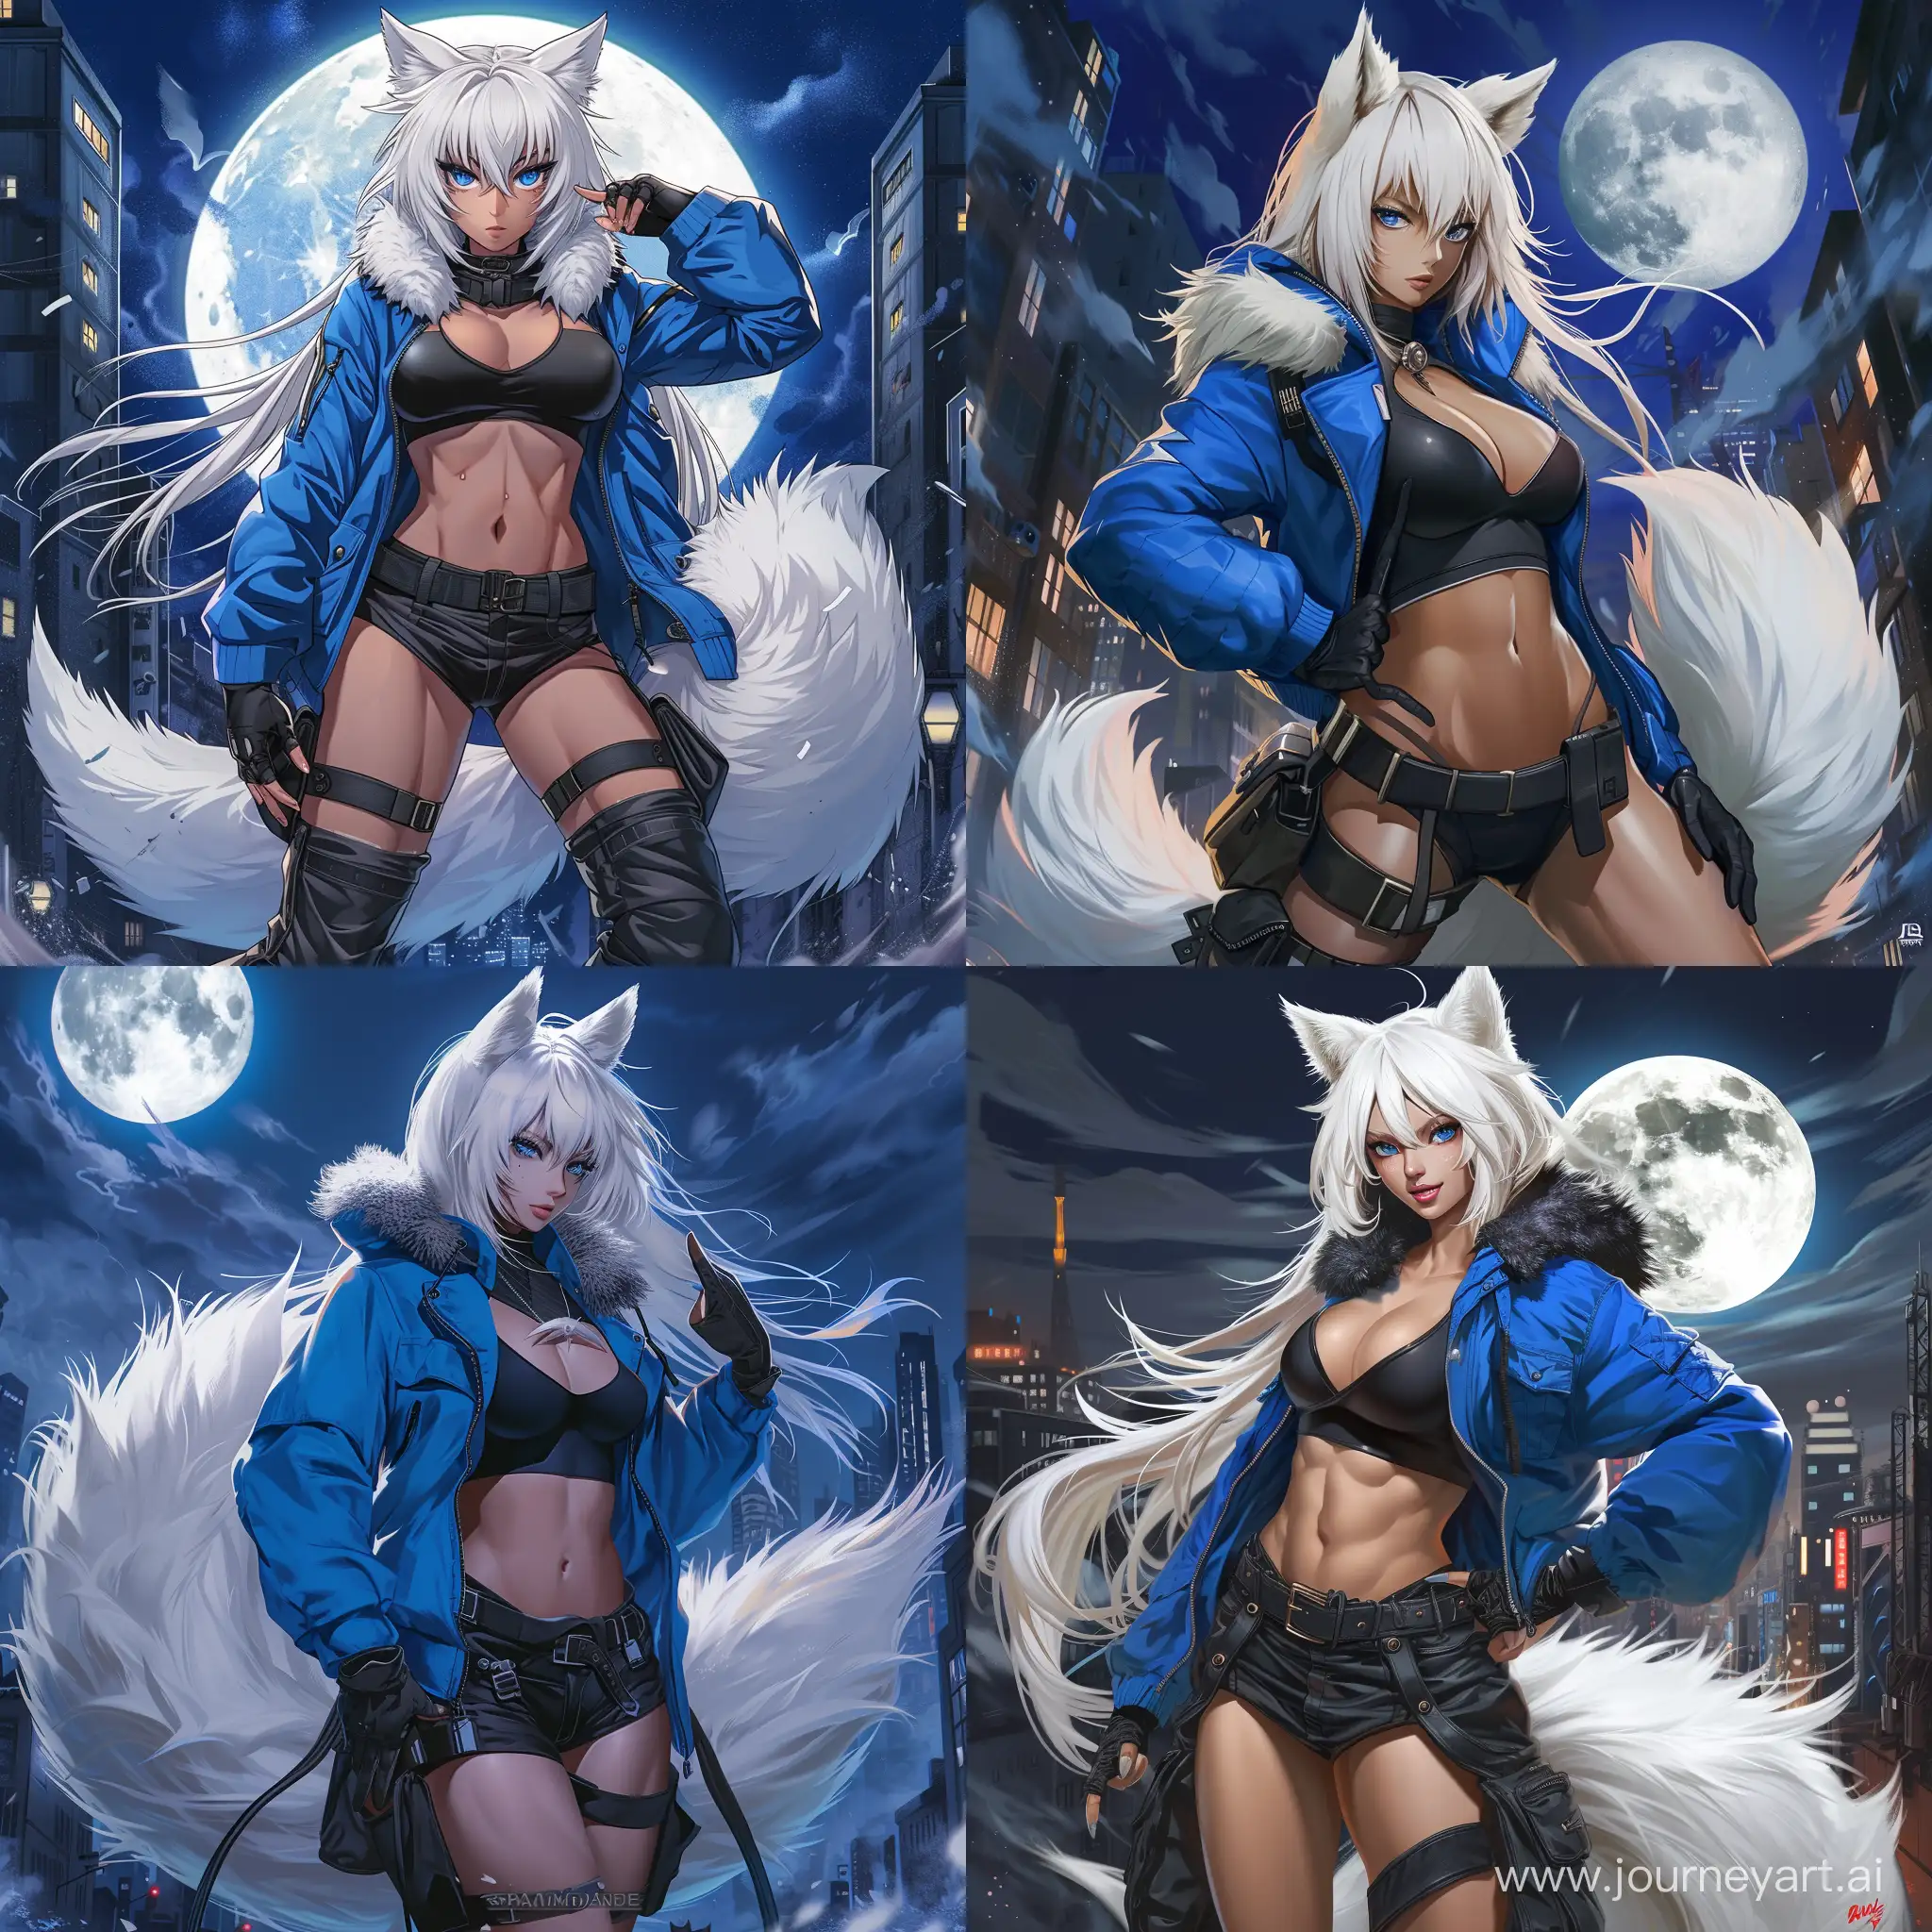 anime-style, full body, athletic, muscular, tan skin, adult, asian woman, long white hair, white fox ears, white fox tail attached to her waist, fierce blue eyes, blue jacket, black leotard, baggy black cargo pants, black boots, fingerless black leather gloves, dynamic, city, night, full moon, fur collar